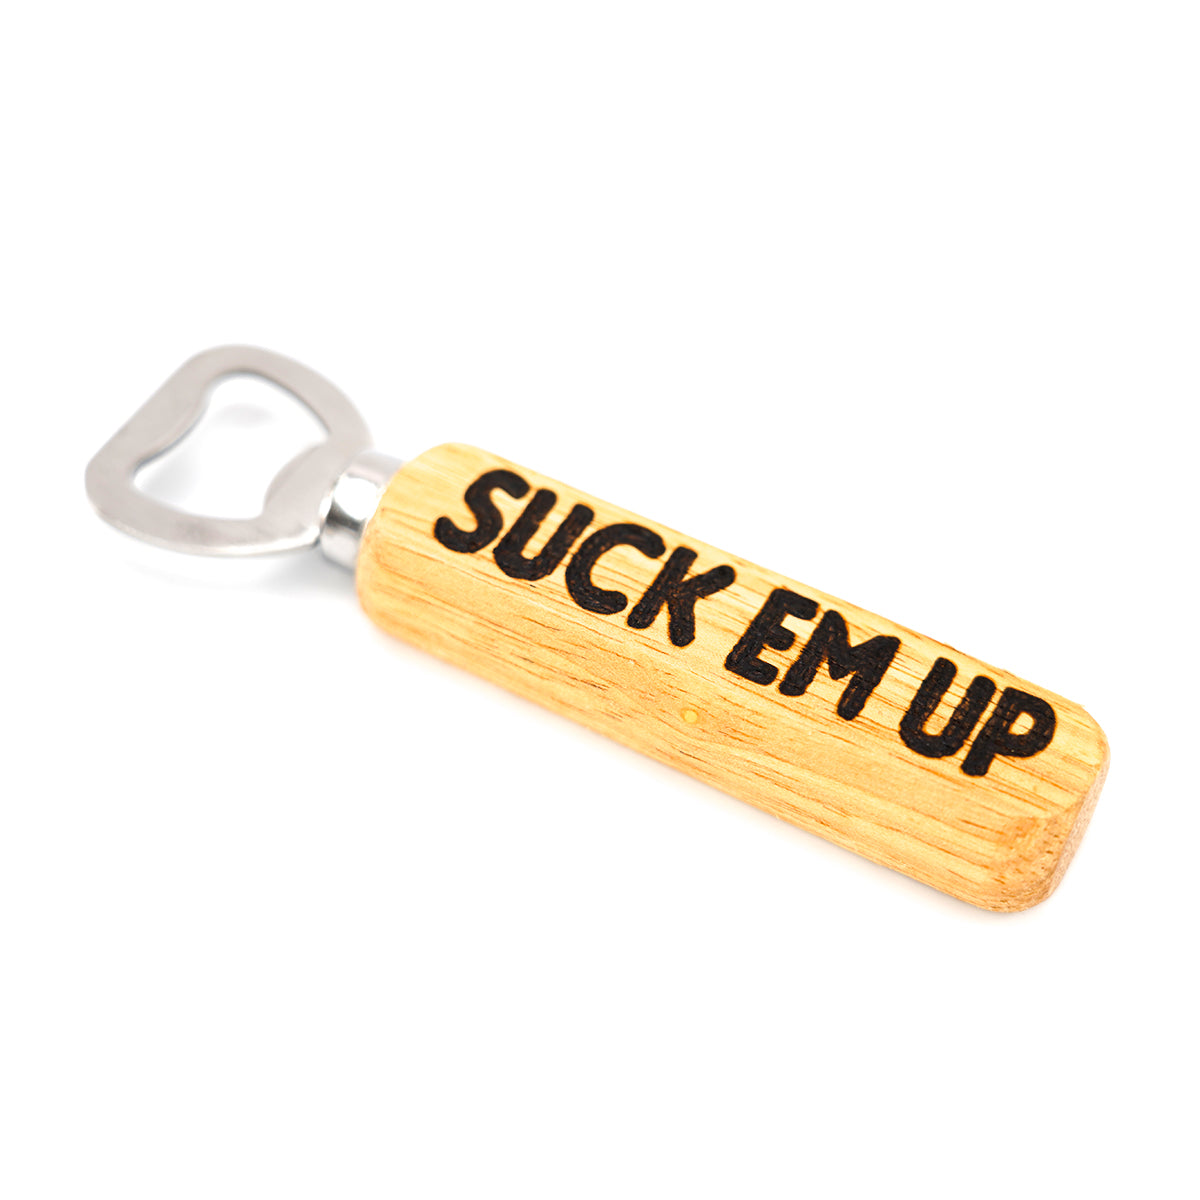 Wood and Stainless Steel Bottle Opener - Suck Em Up